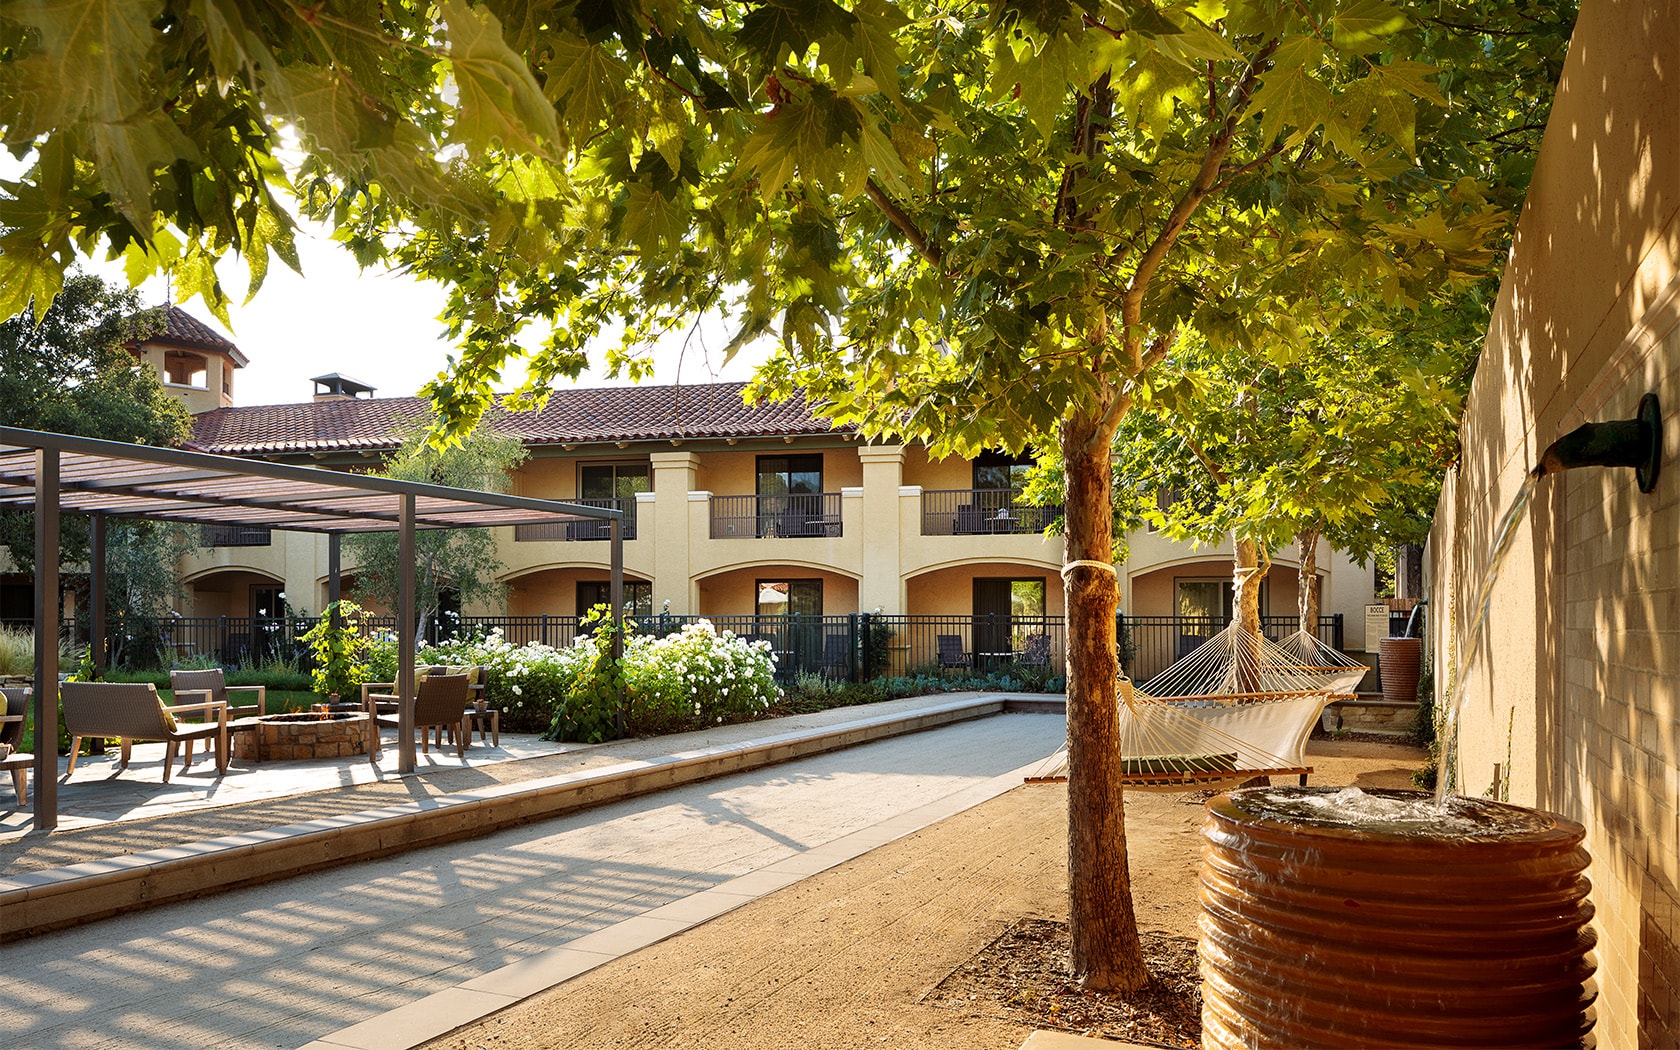 Exterior view of the courtyard surrounded by trees and nature